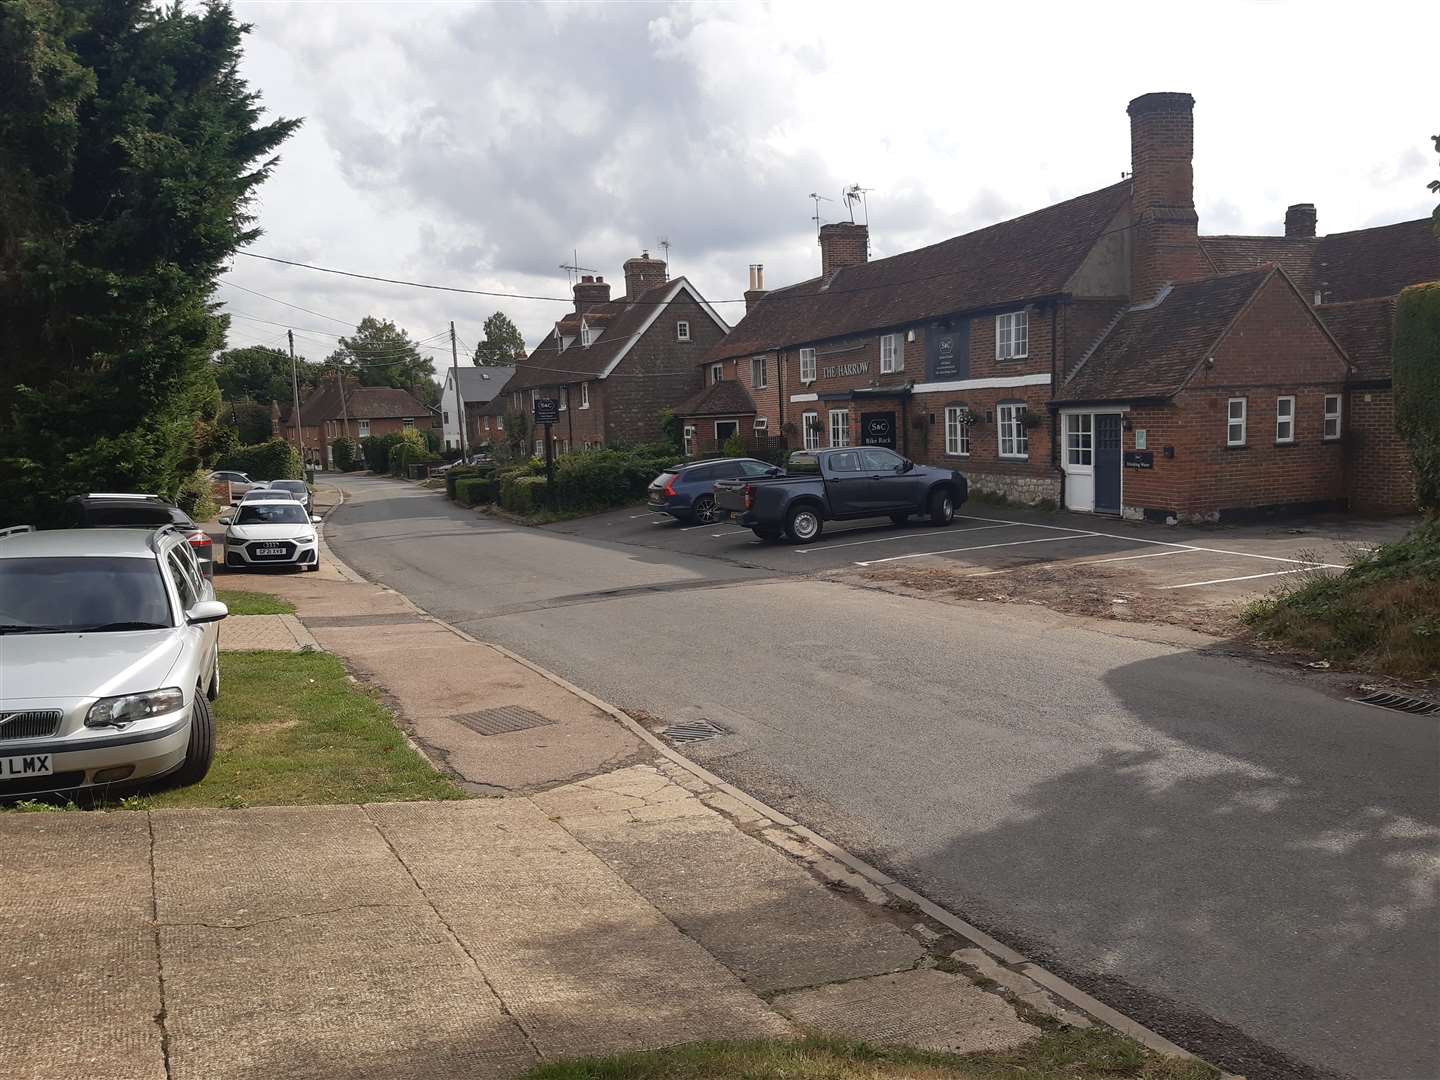 A view of The Street in Ulcombe